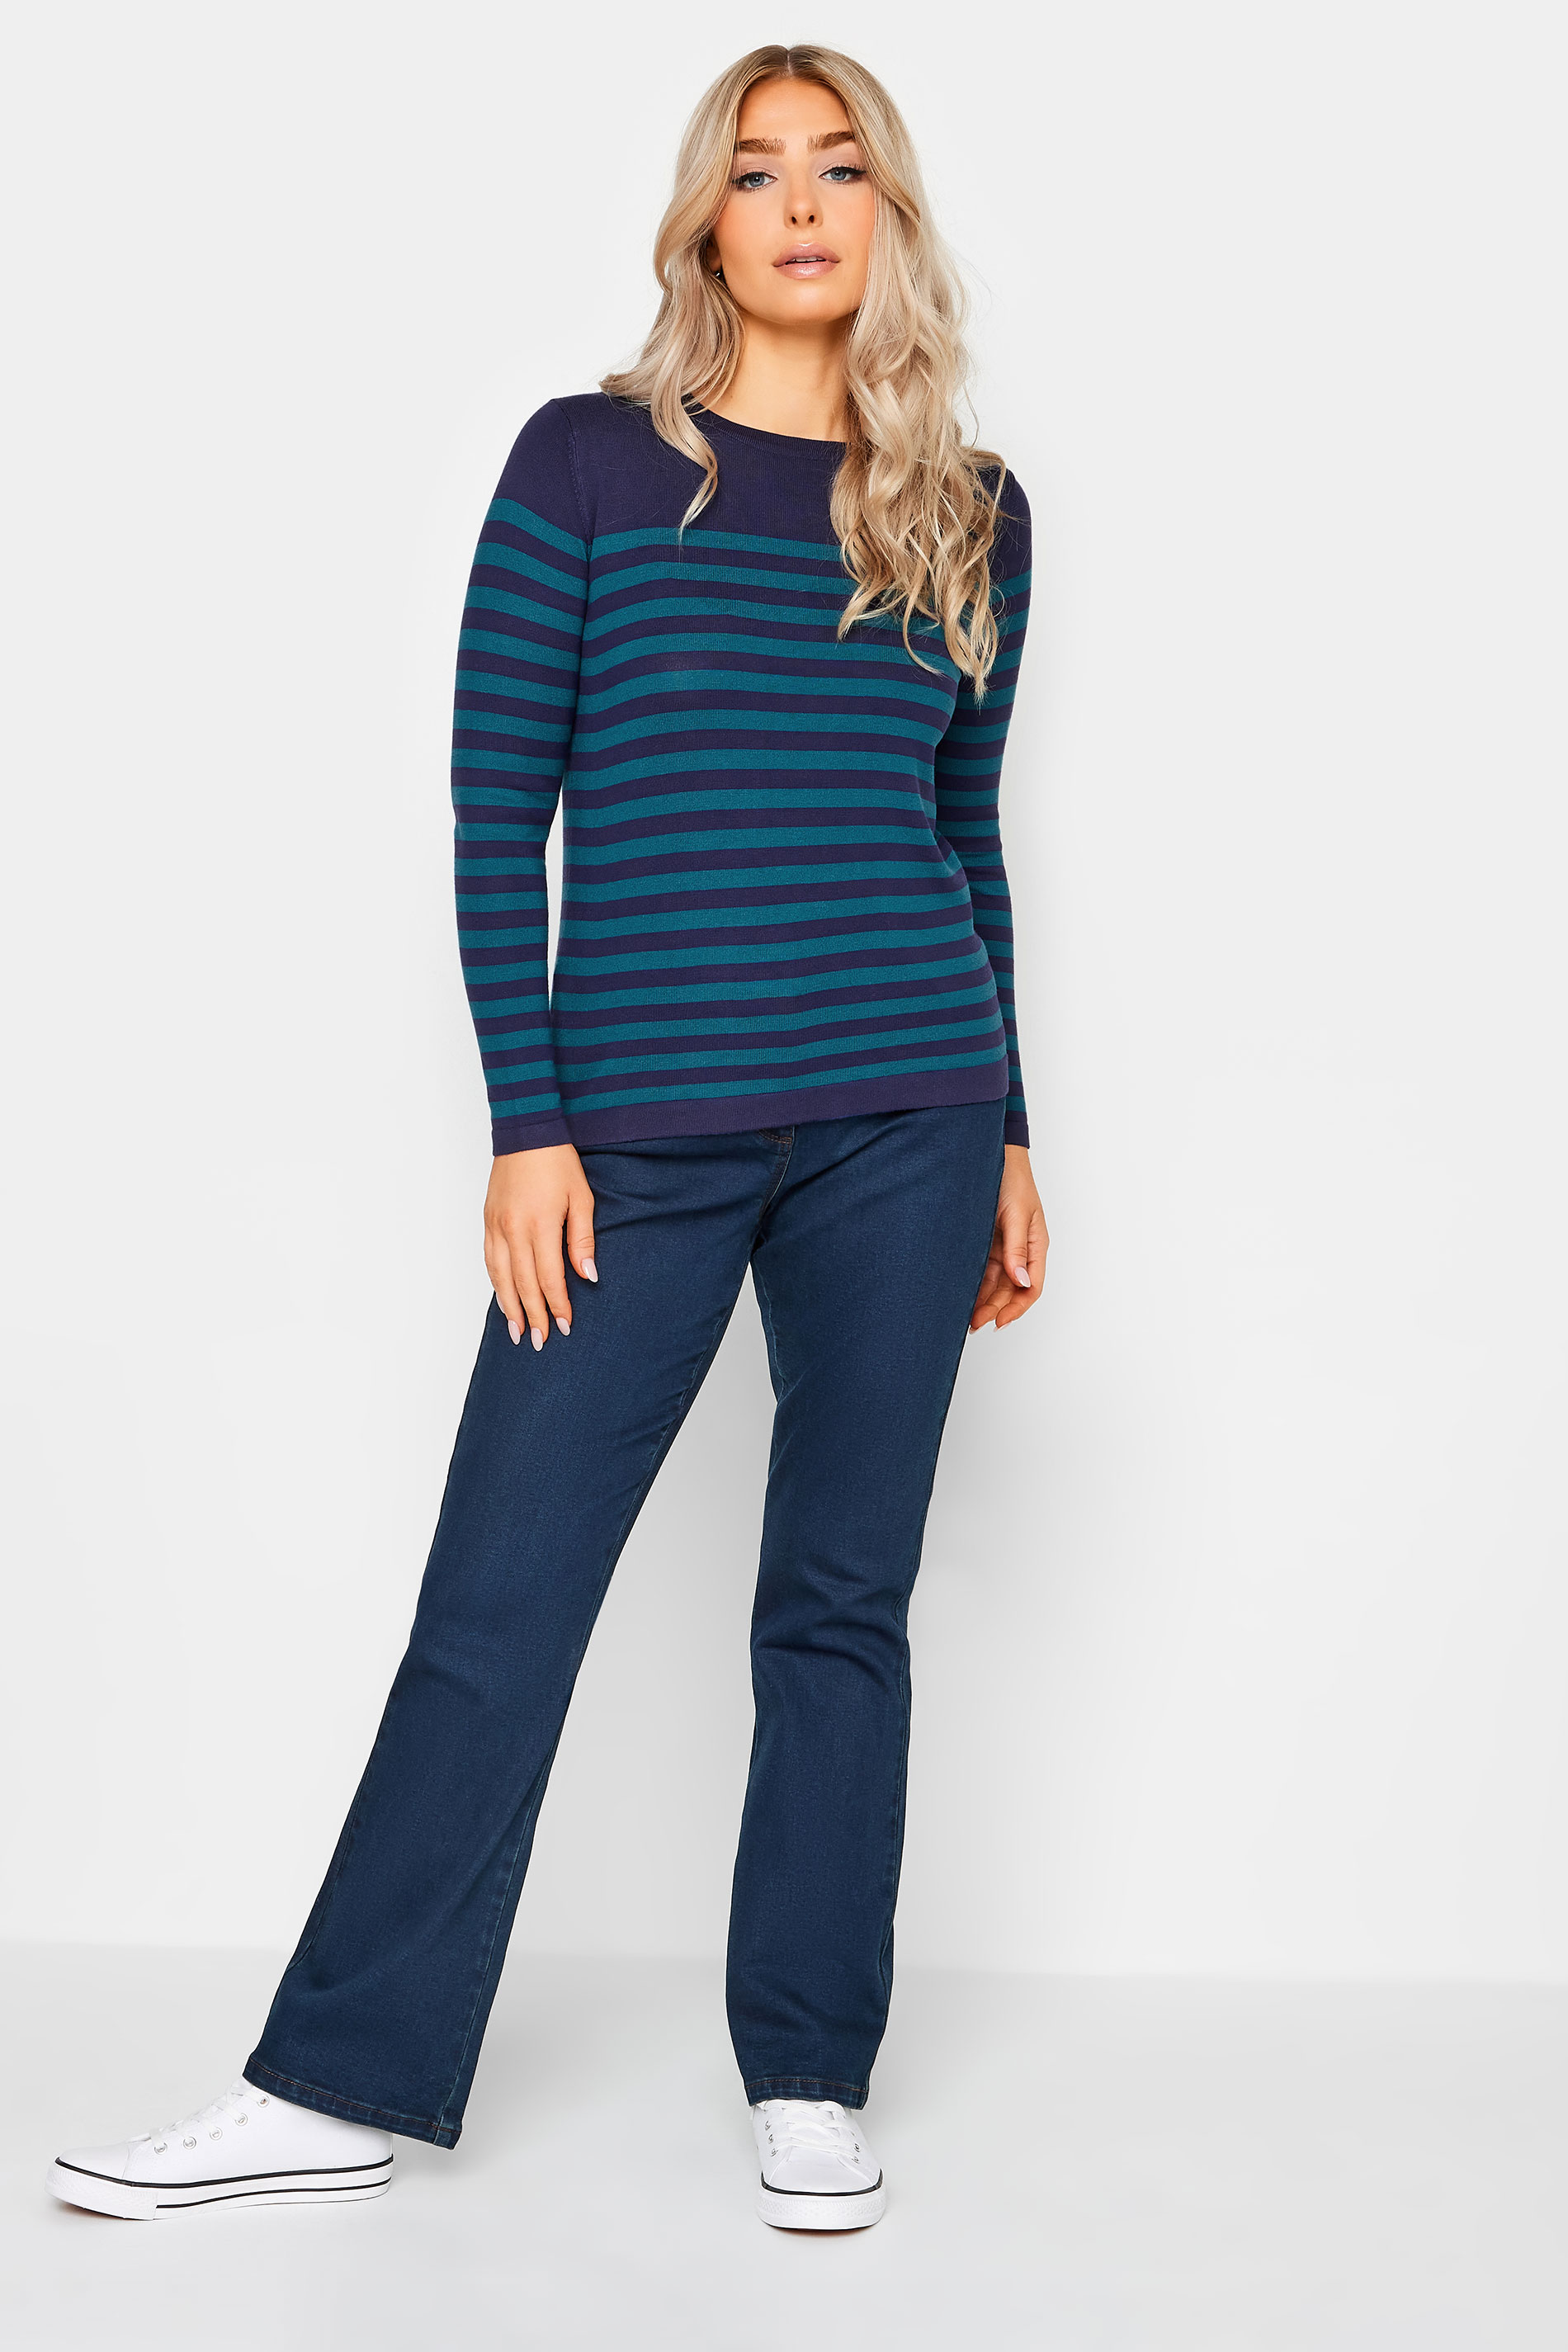 M&Co Petite Navy Blue Stripe Knitted Jumper | M&Co 2